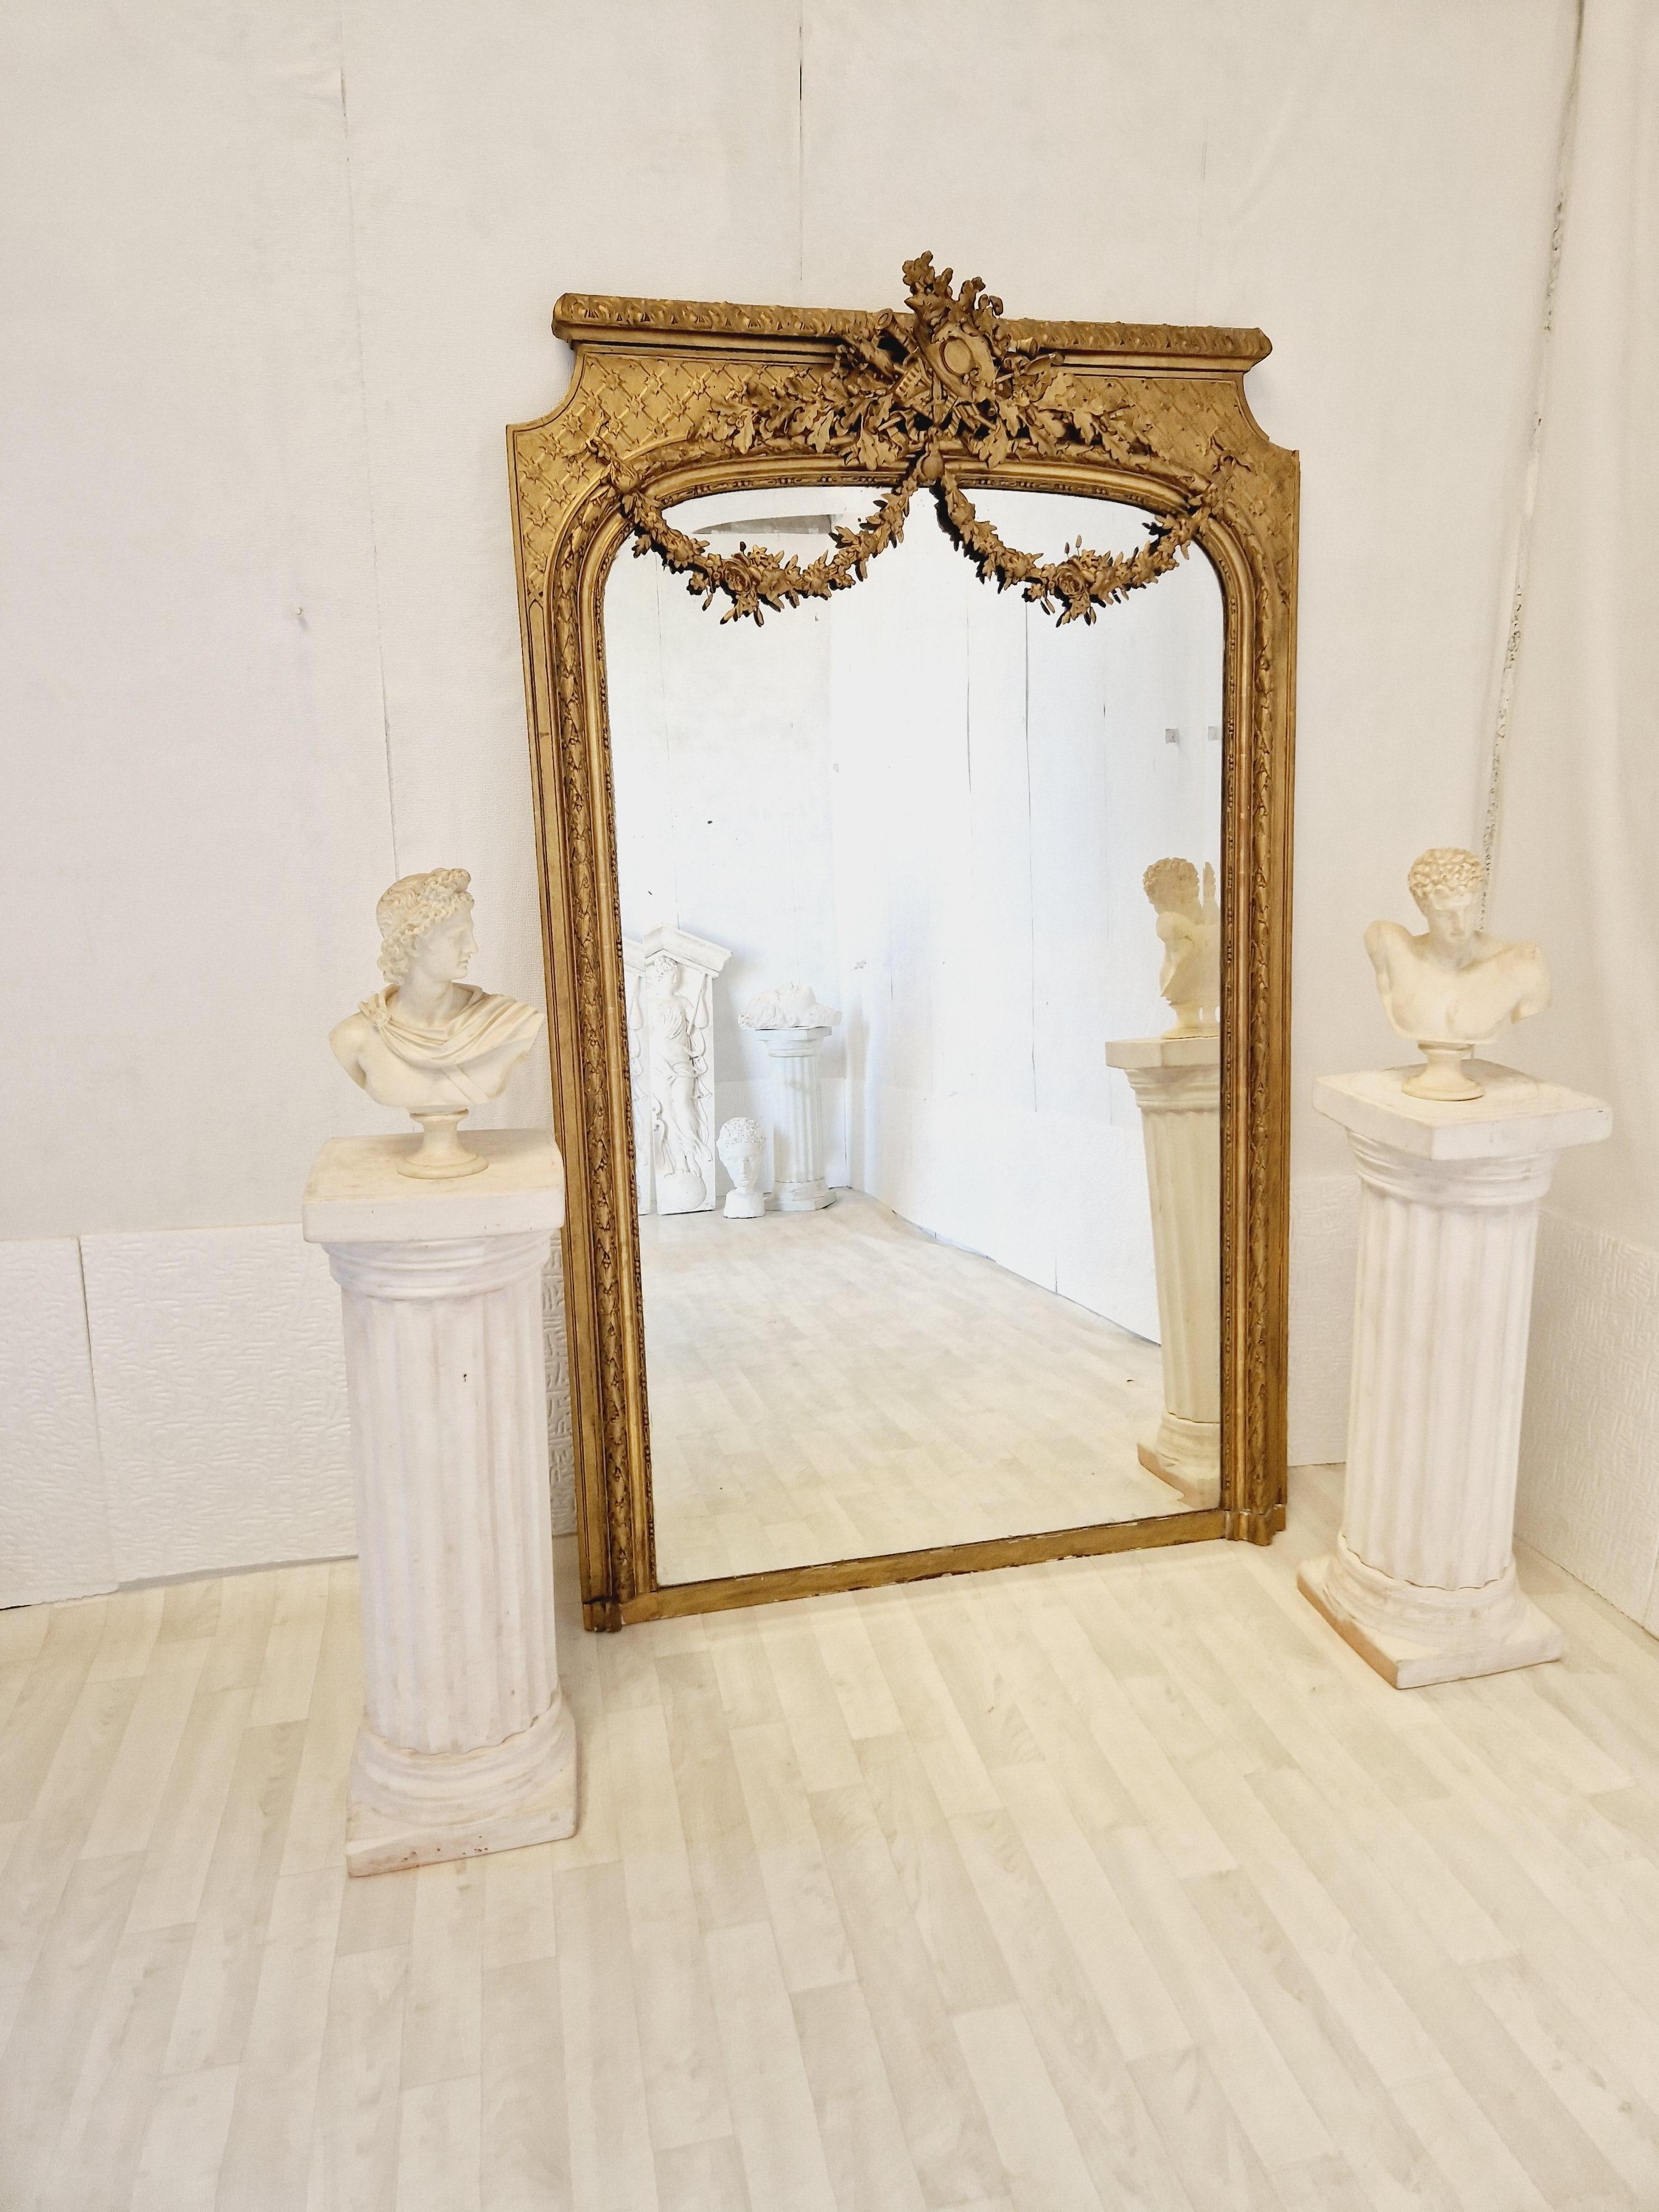 This Beautiful mirror is of the Louis XVI style and dated around 1870. The surface of the mirror has giltwood frame and the original glass mirror plate, there is a harvest theme with a straw hat upon a floral crest which is a unique feature of the